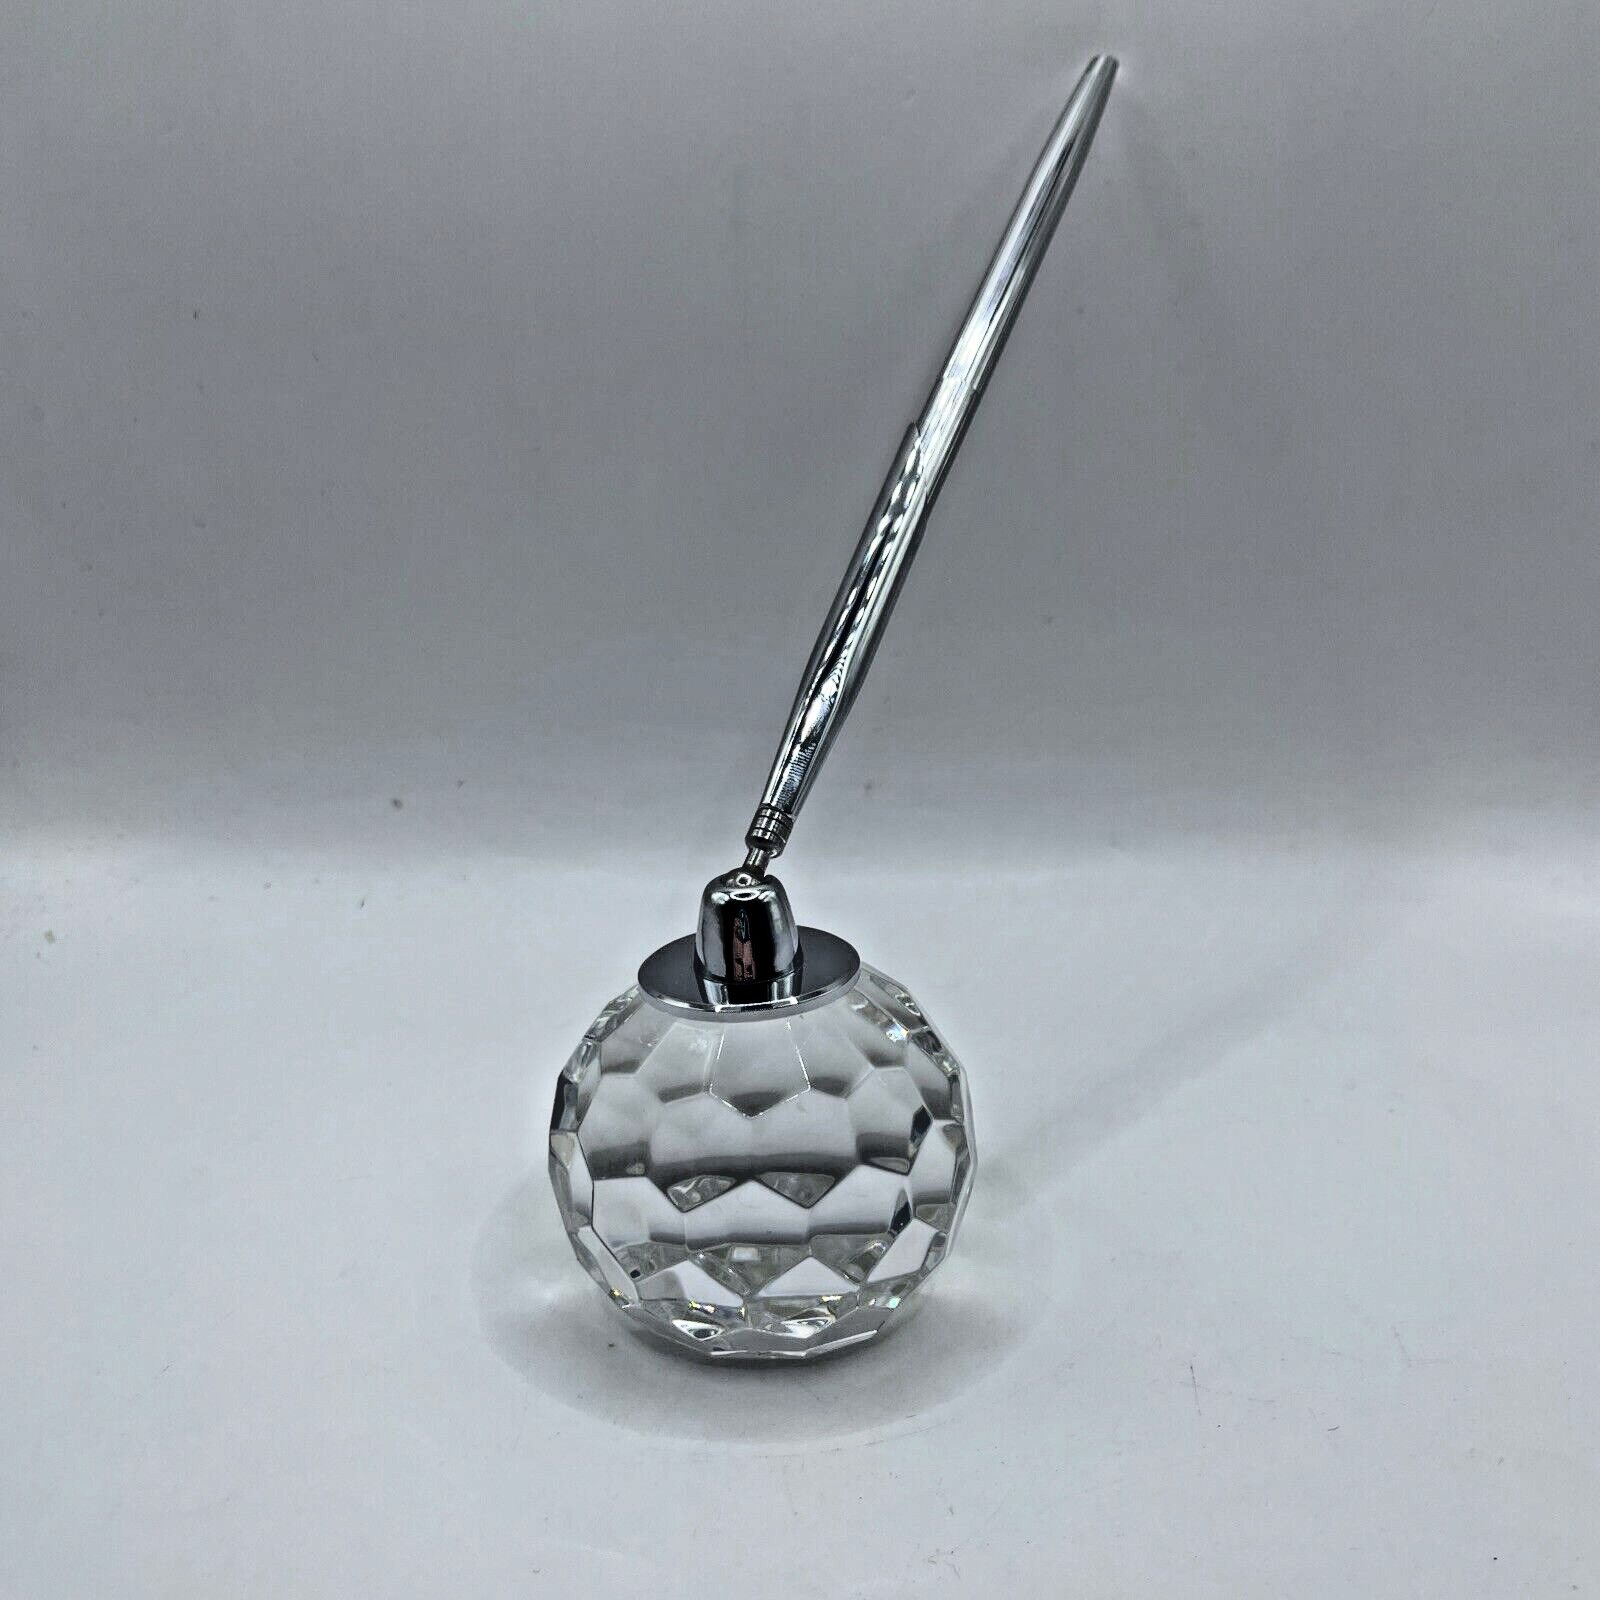 Waterford Crystal Paperweight Pen Holder Silver Colored Refillable Pen Marked